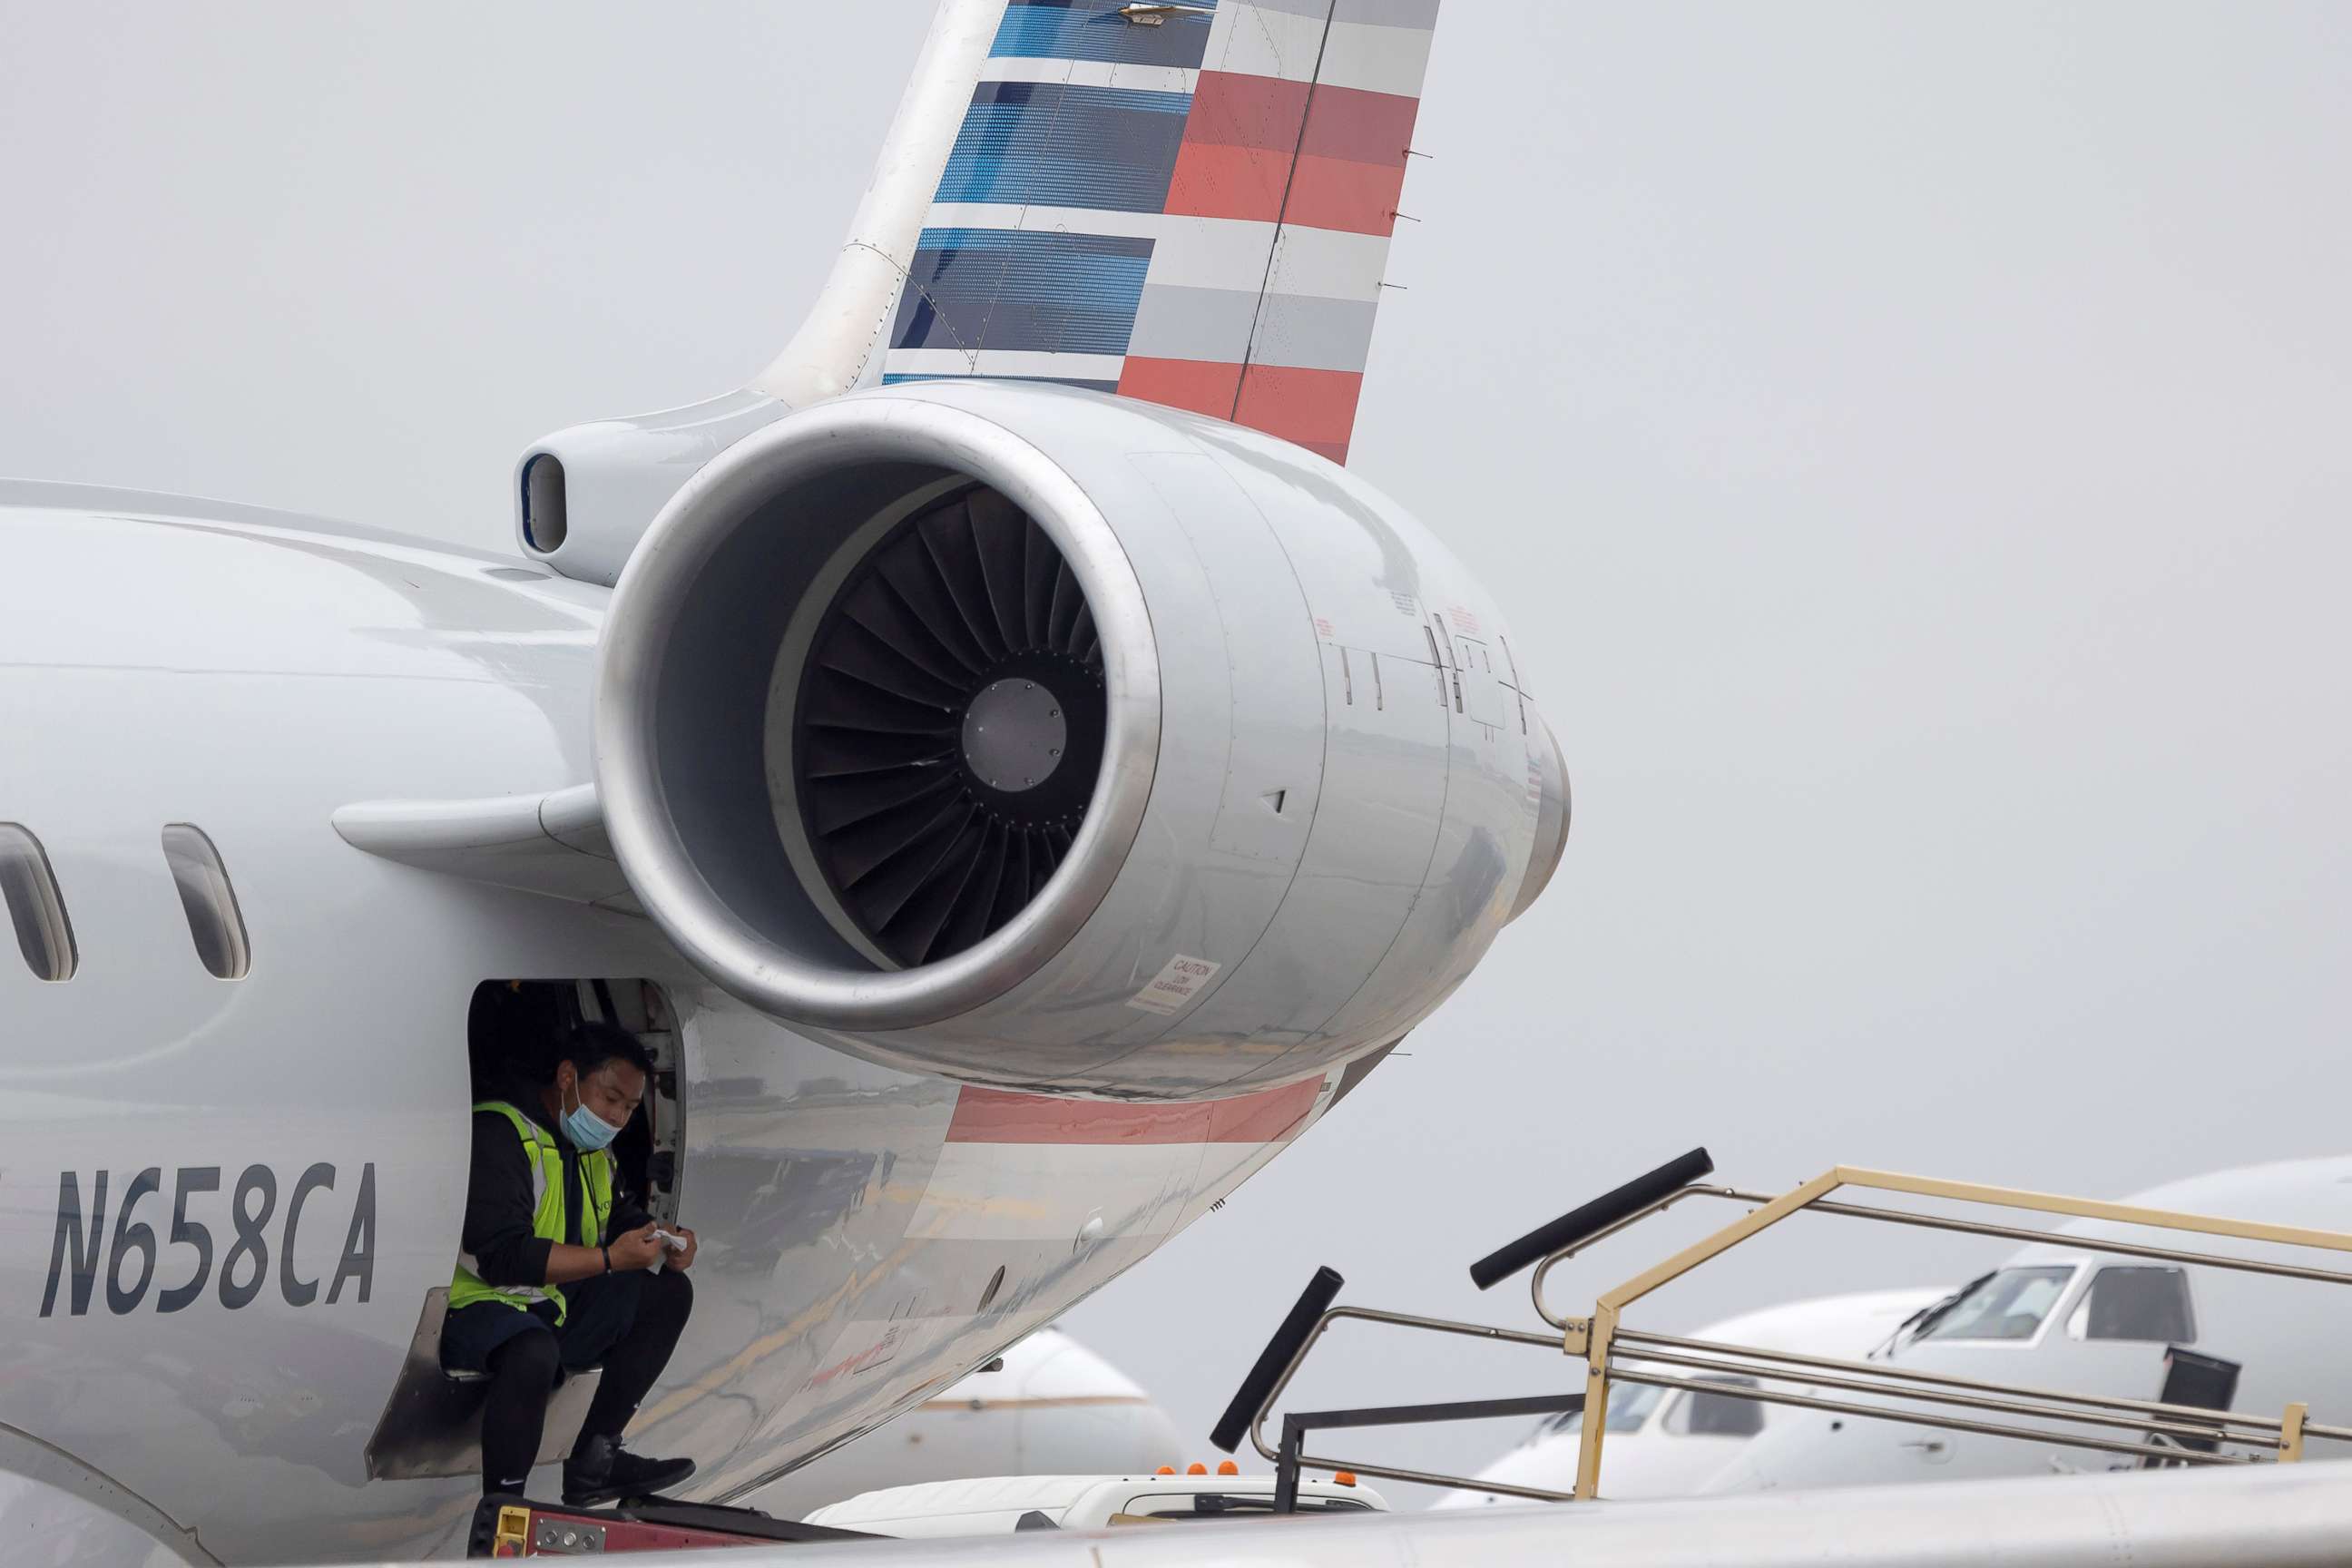 PHOTO: An American Airlines worker waits at the Los Angeles international airport as more than 1,400 American Airlines flights over the weekend were cancelled due to staff shortages and unfavorable weather, Oct. 31, 2021, in Los Angeles.